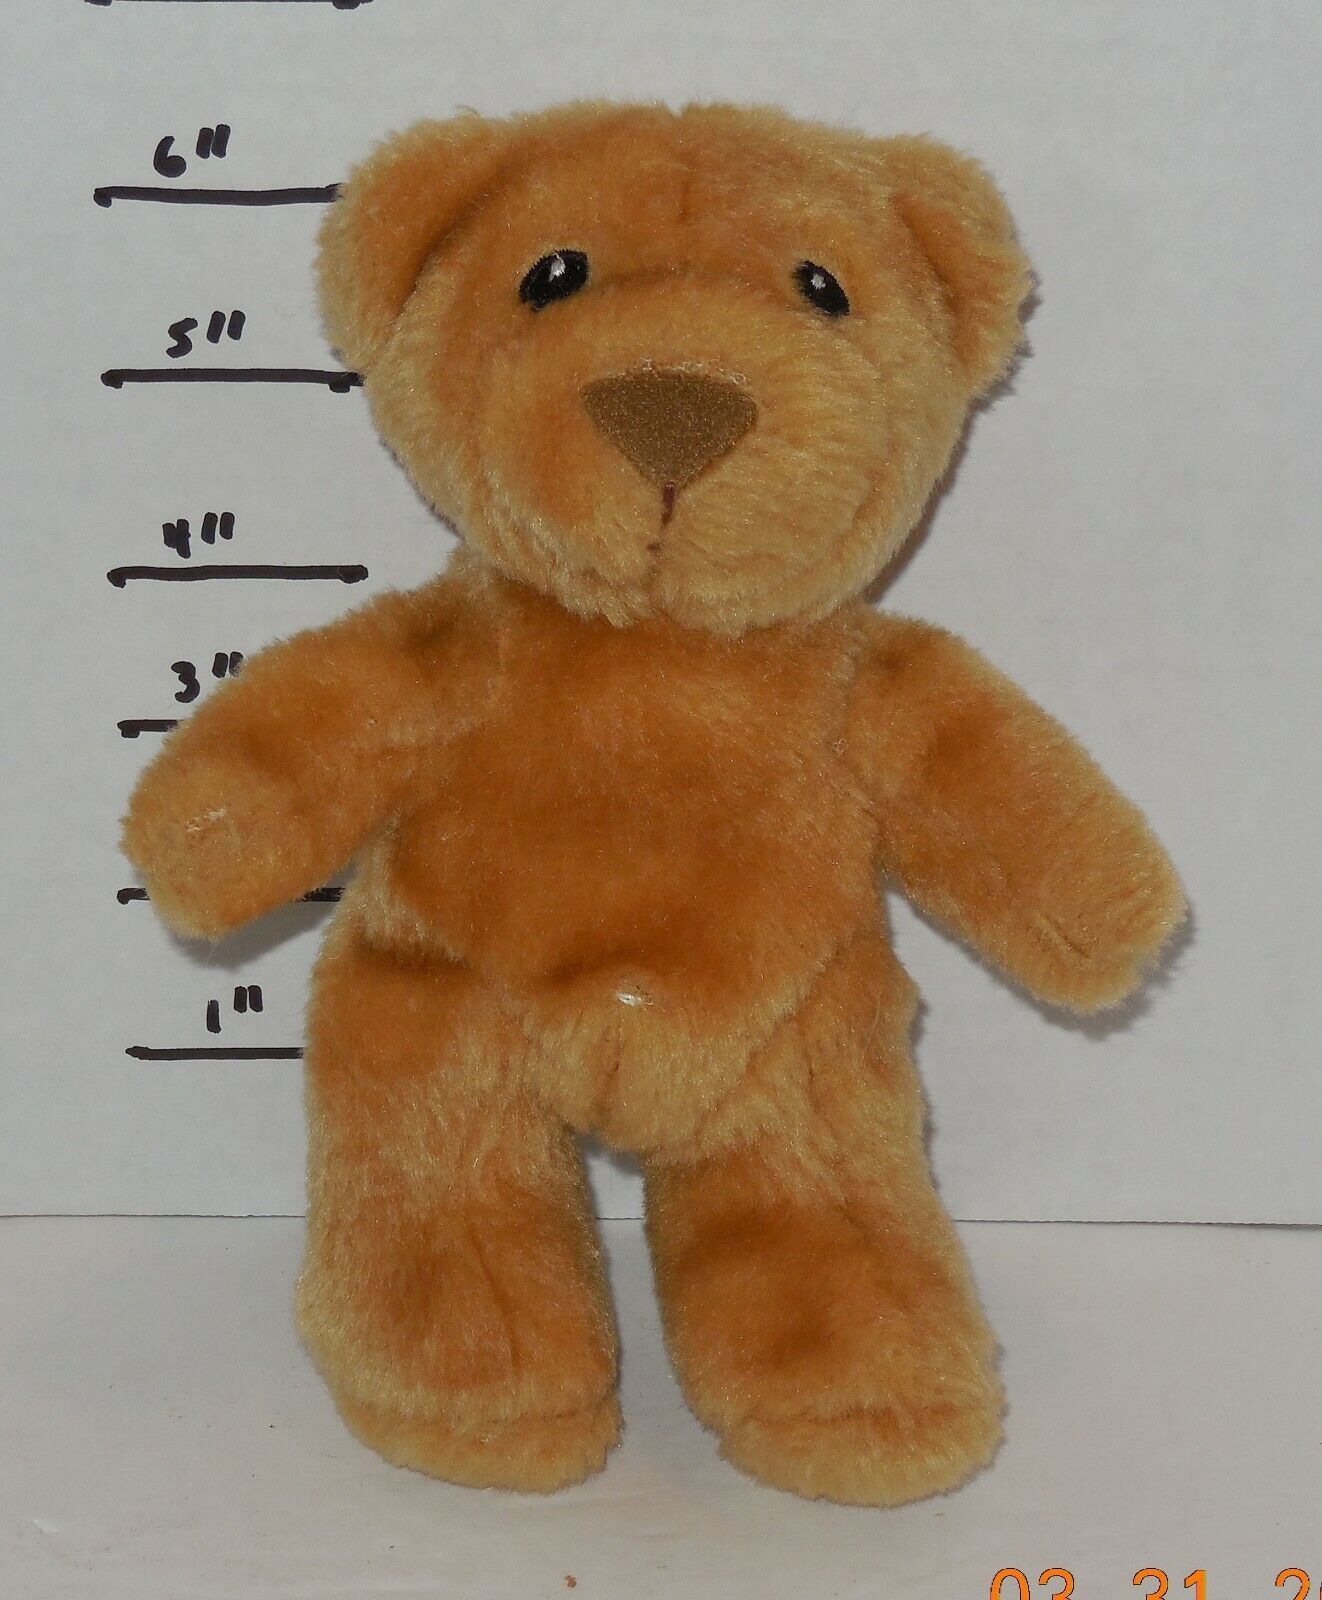 2006 Lil Luvables Brown Bear Spin Master Toy Teddy 6" For Fluffy Factory - $14.43